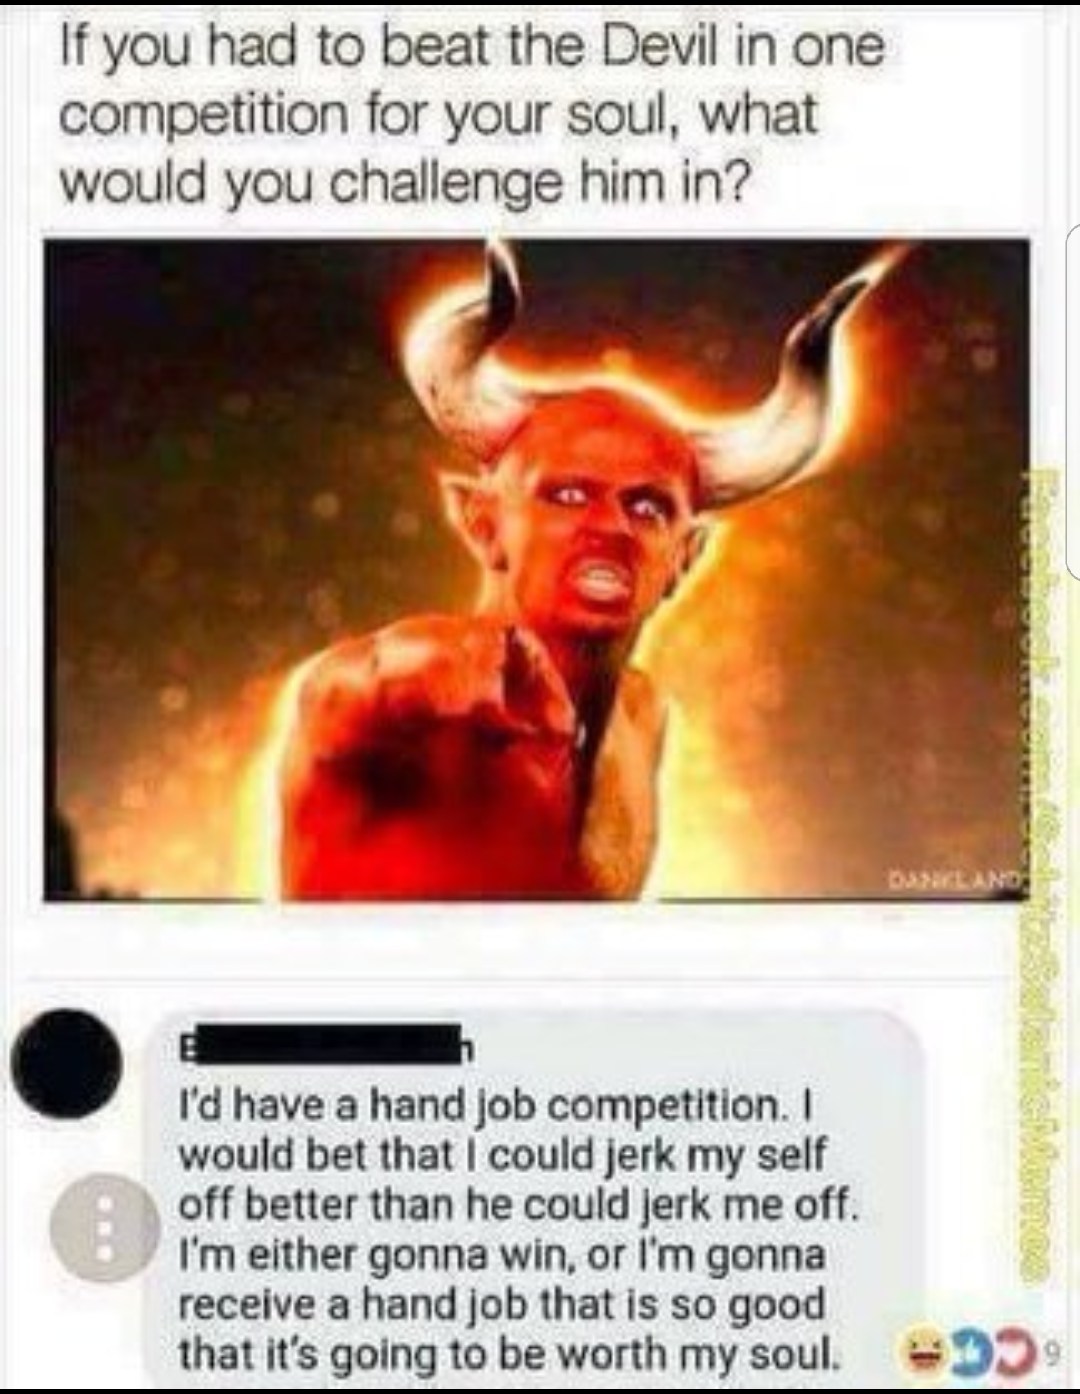 devil handjob meme - If you had to beat the Devil in one competition for your soul, what would you challenge him in? I'd have a hand job competition. I would bet that I could jerk my self off better than he could jerk me off. I'm either gonna win, or I'm